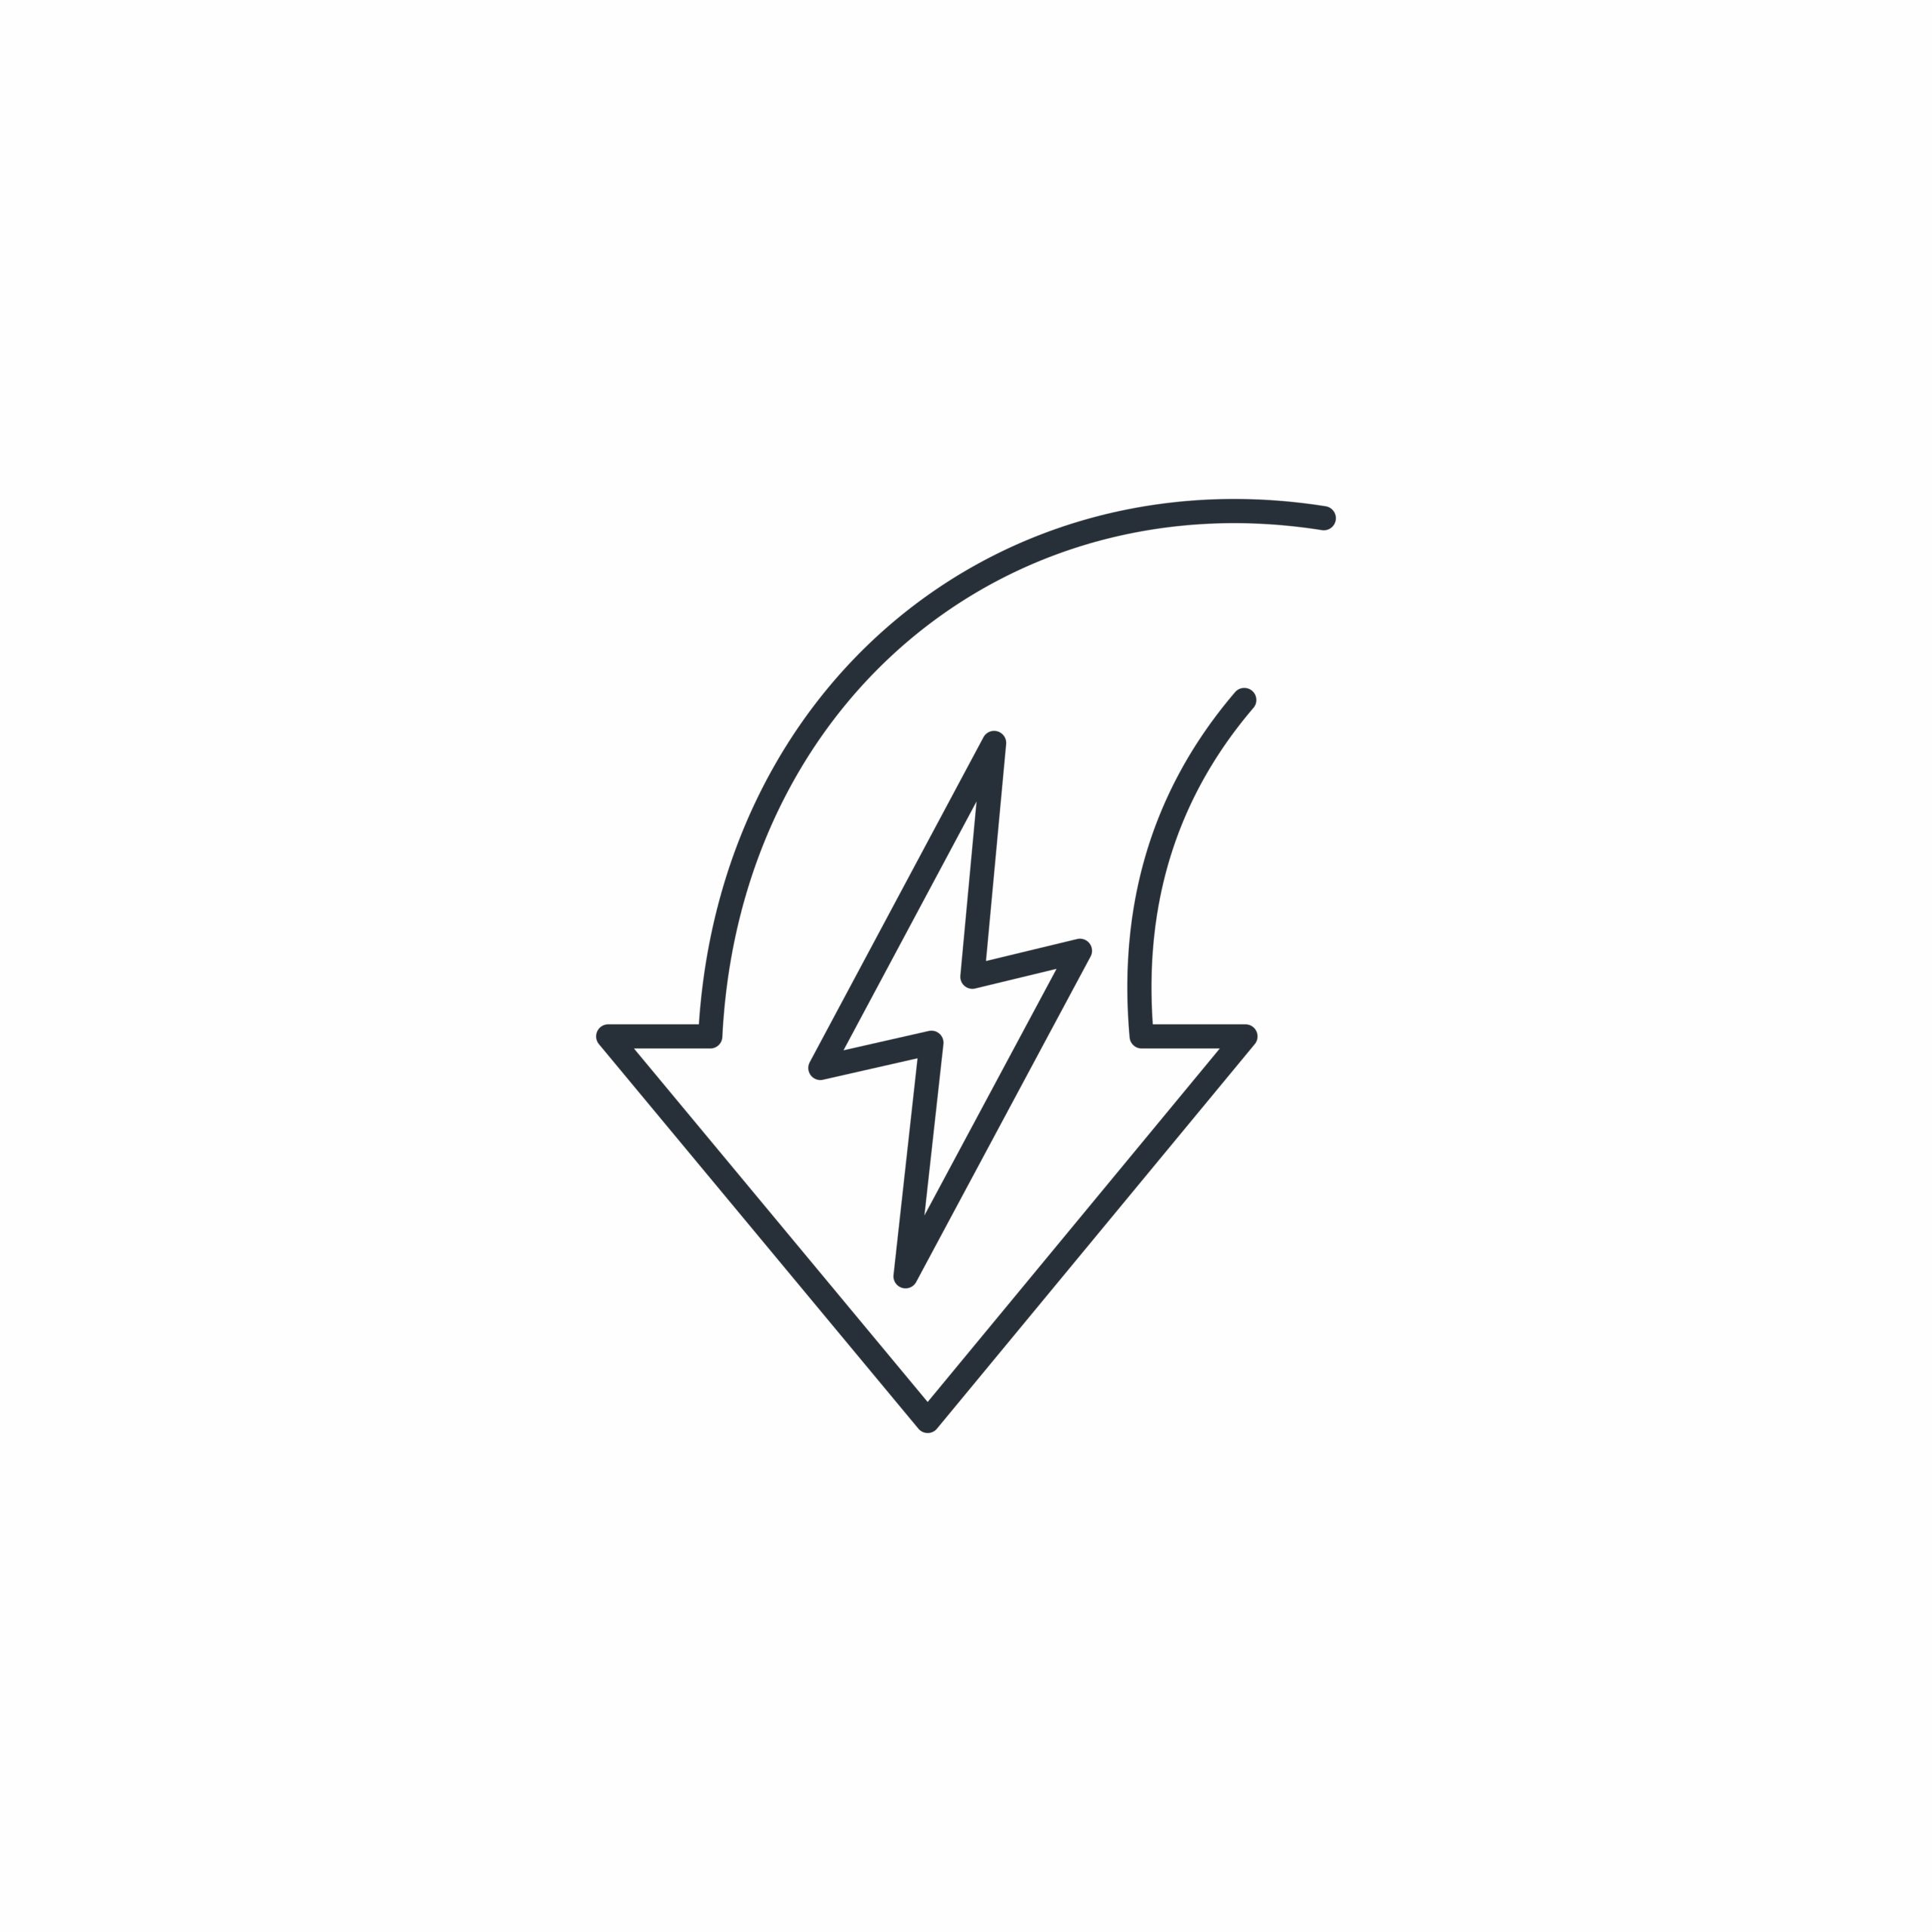 vector image of a black and white arrow pointed downwards with a lightning bolt in the center